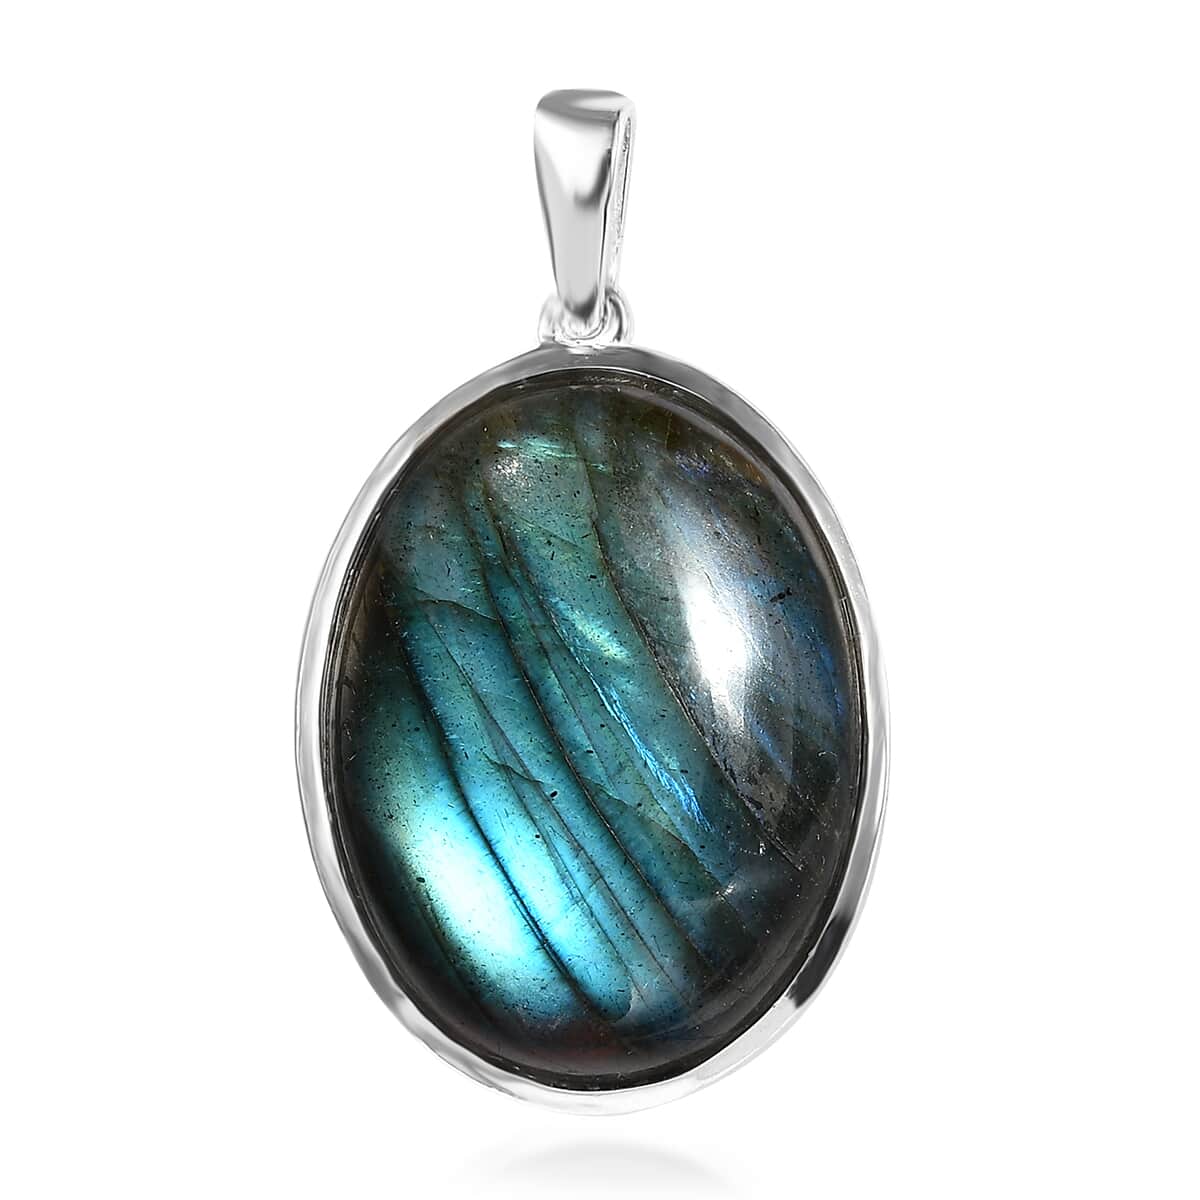 Buy Malagasy Labradorite Solitaire Pendant in Sterling Silver 16.85 ctw ...